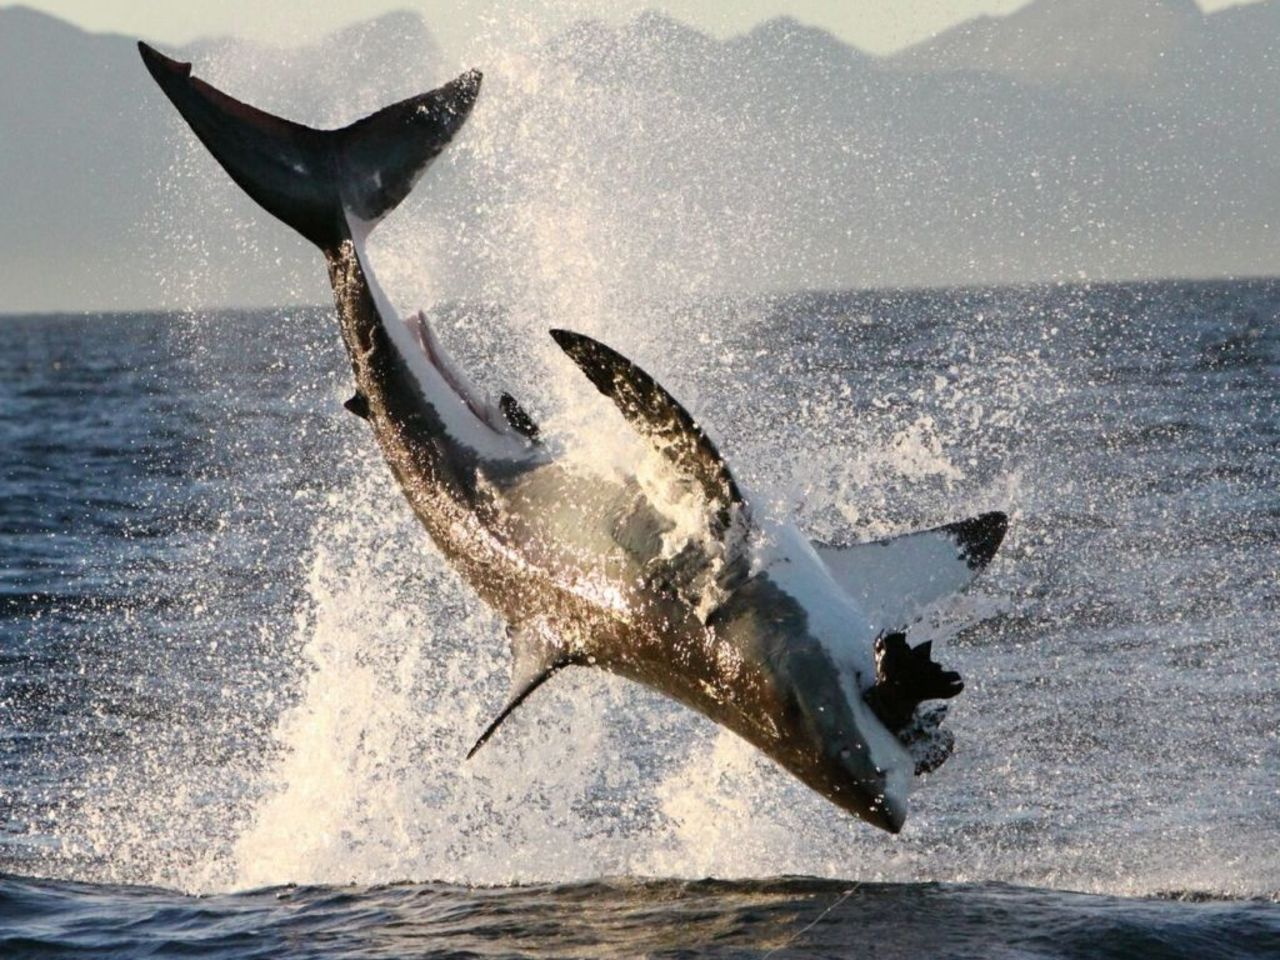 Great Whites often seen hitting a Seal